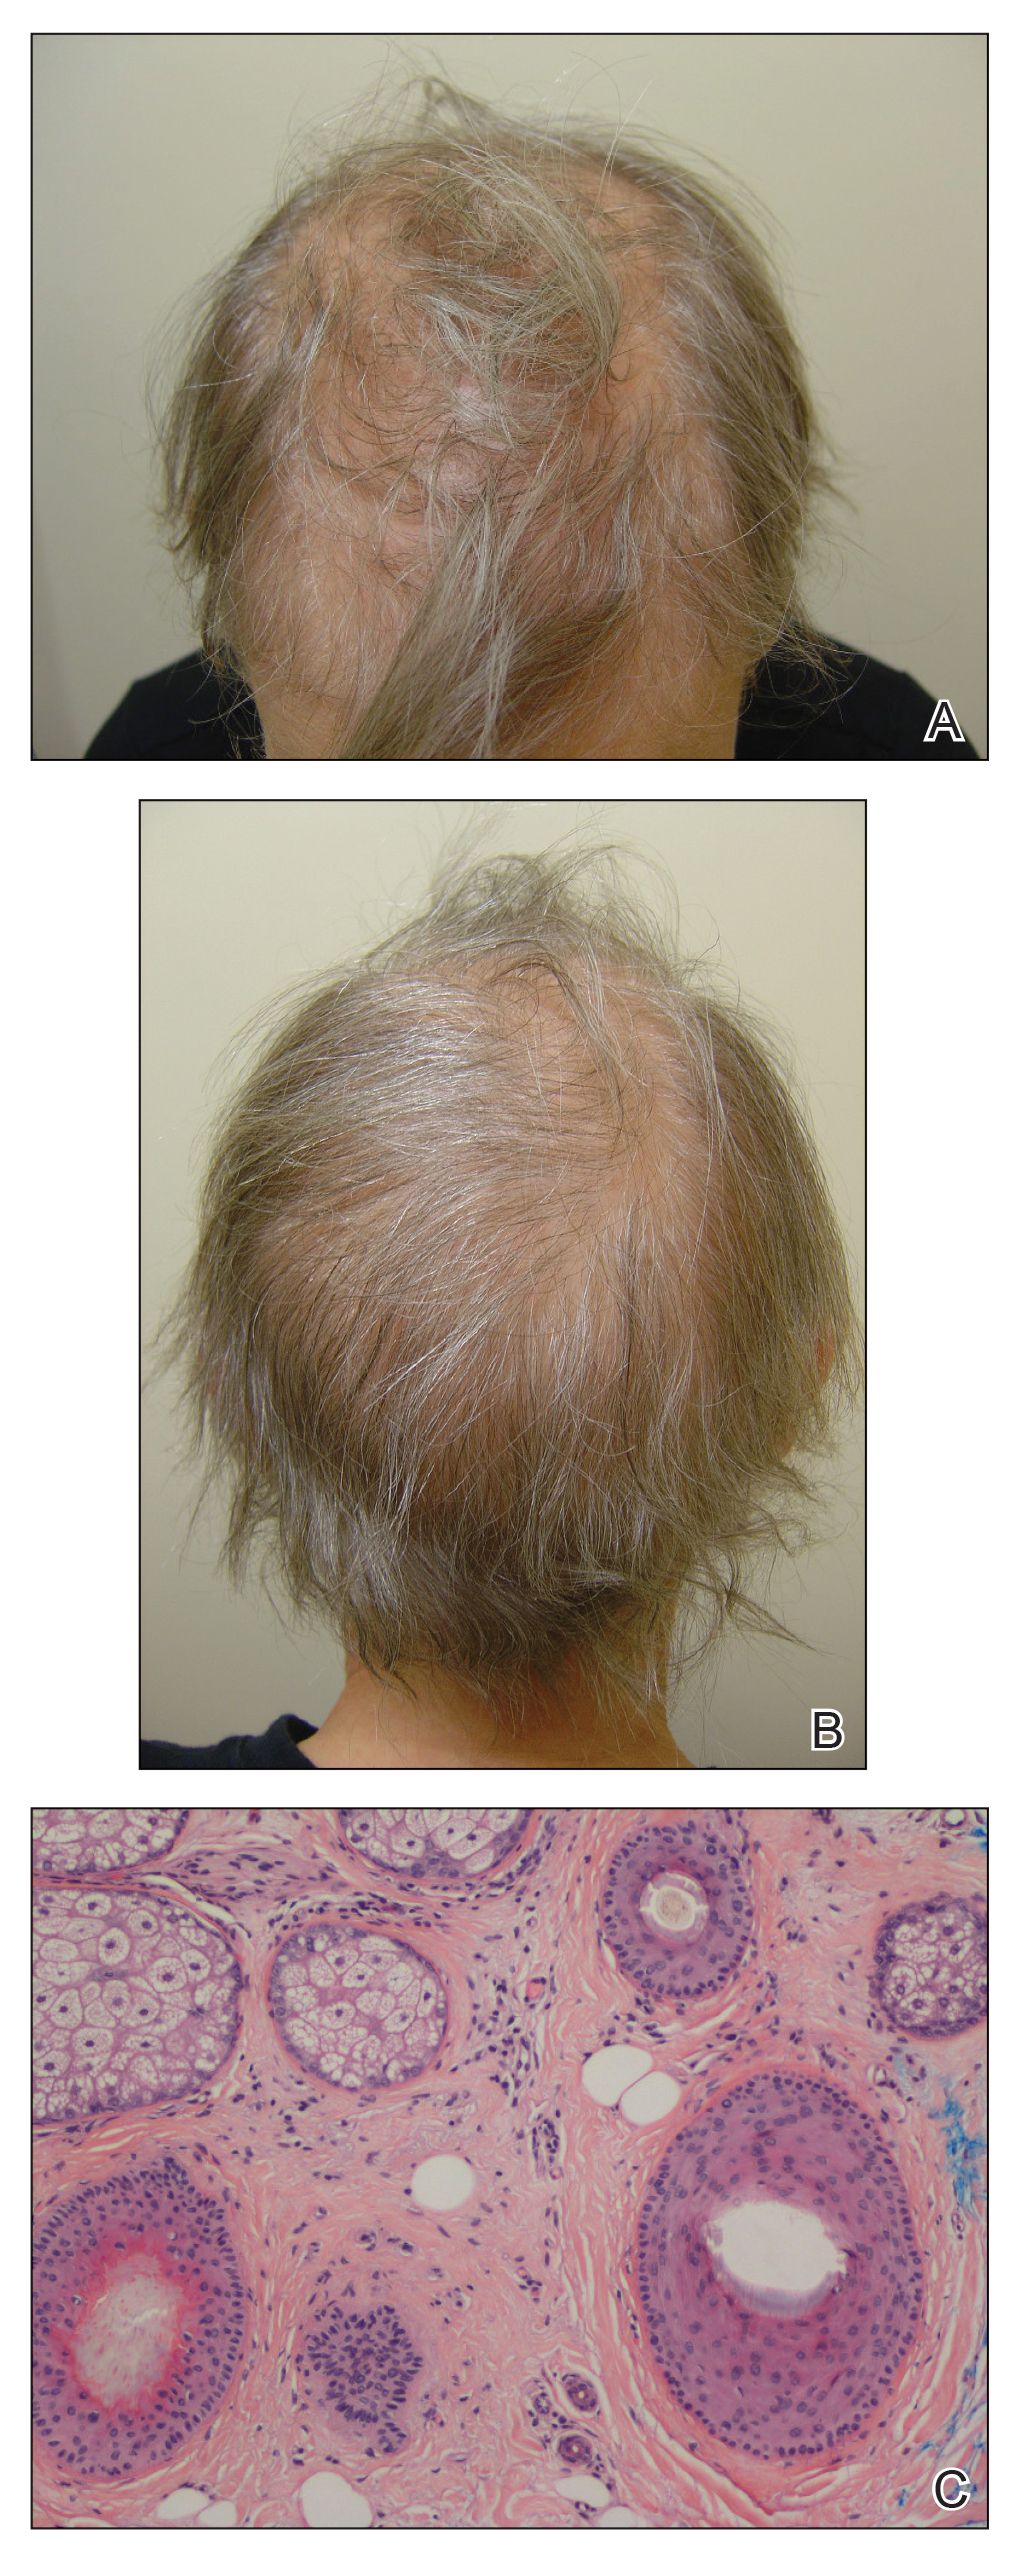 Permanent Alopecia in Breast Cancer Patients: Role of Taxanes and Endocrine  Therapies | MDedge Dermatology